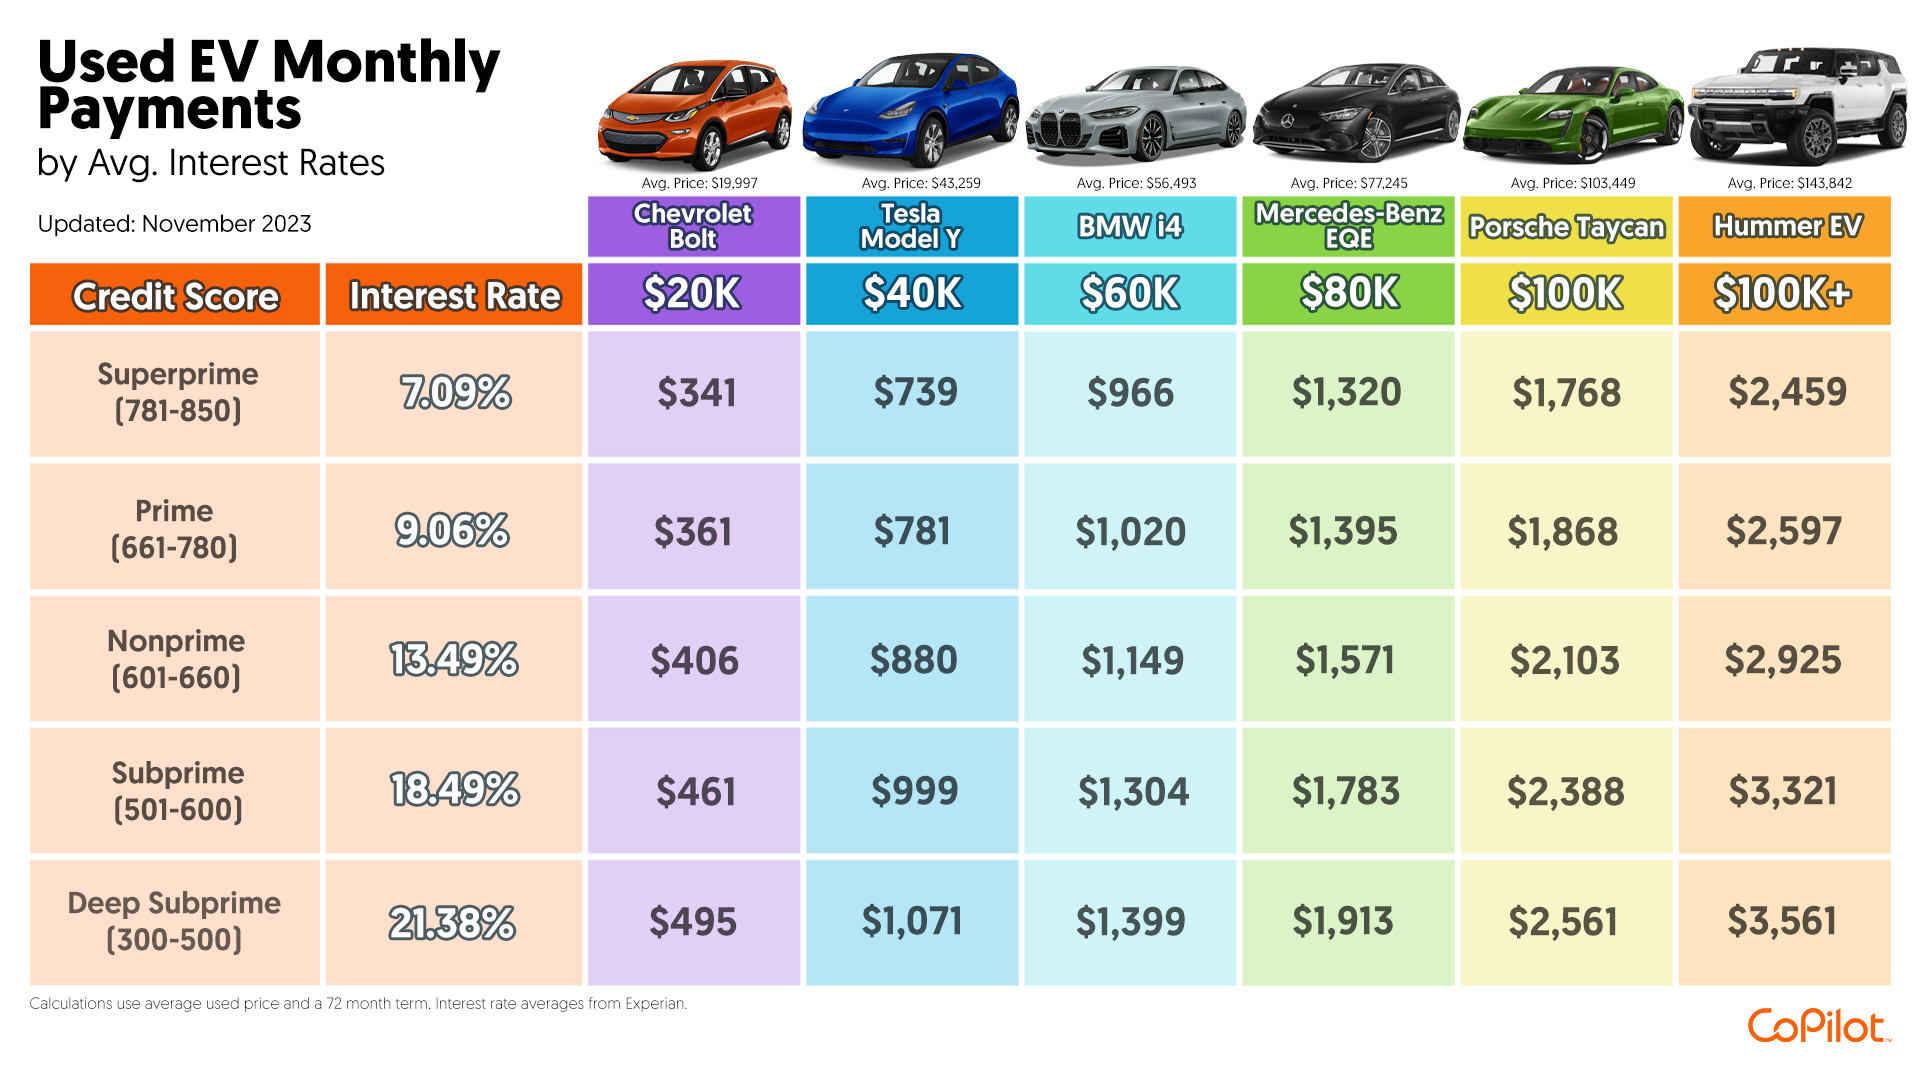 Monthly payment amounts for used electric vehicles at various price levels and interest rates